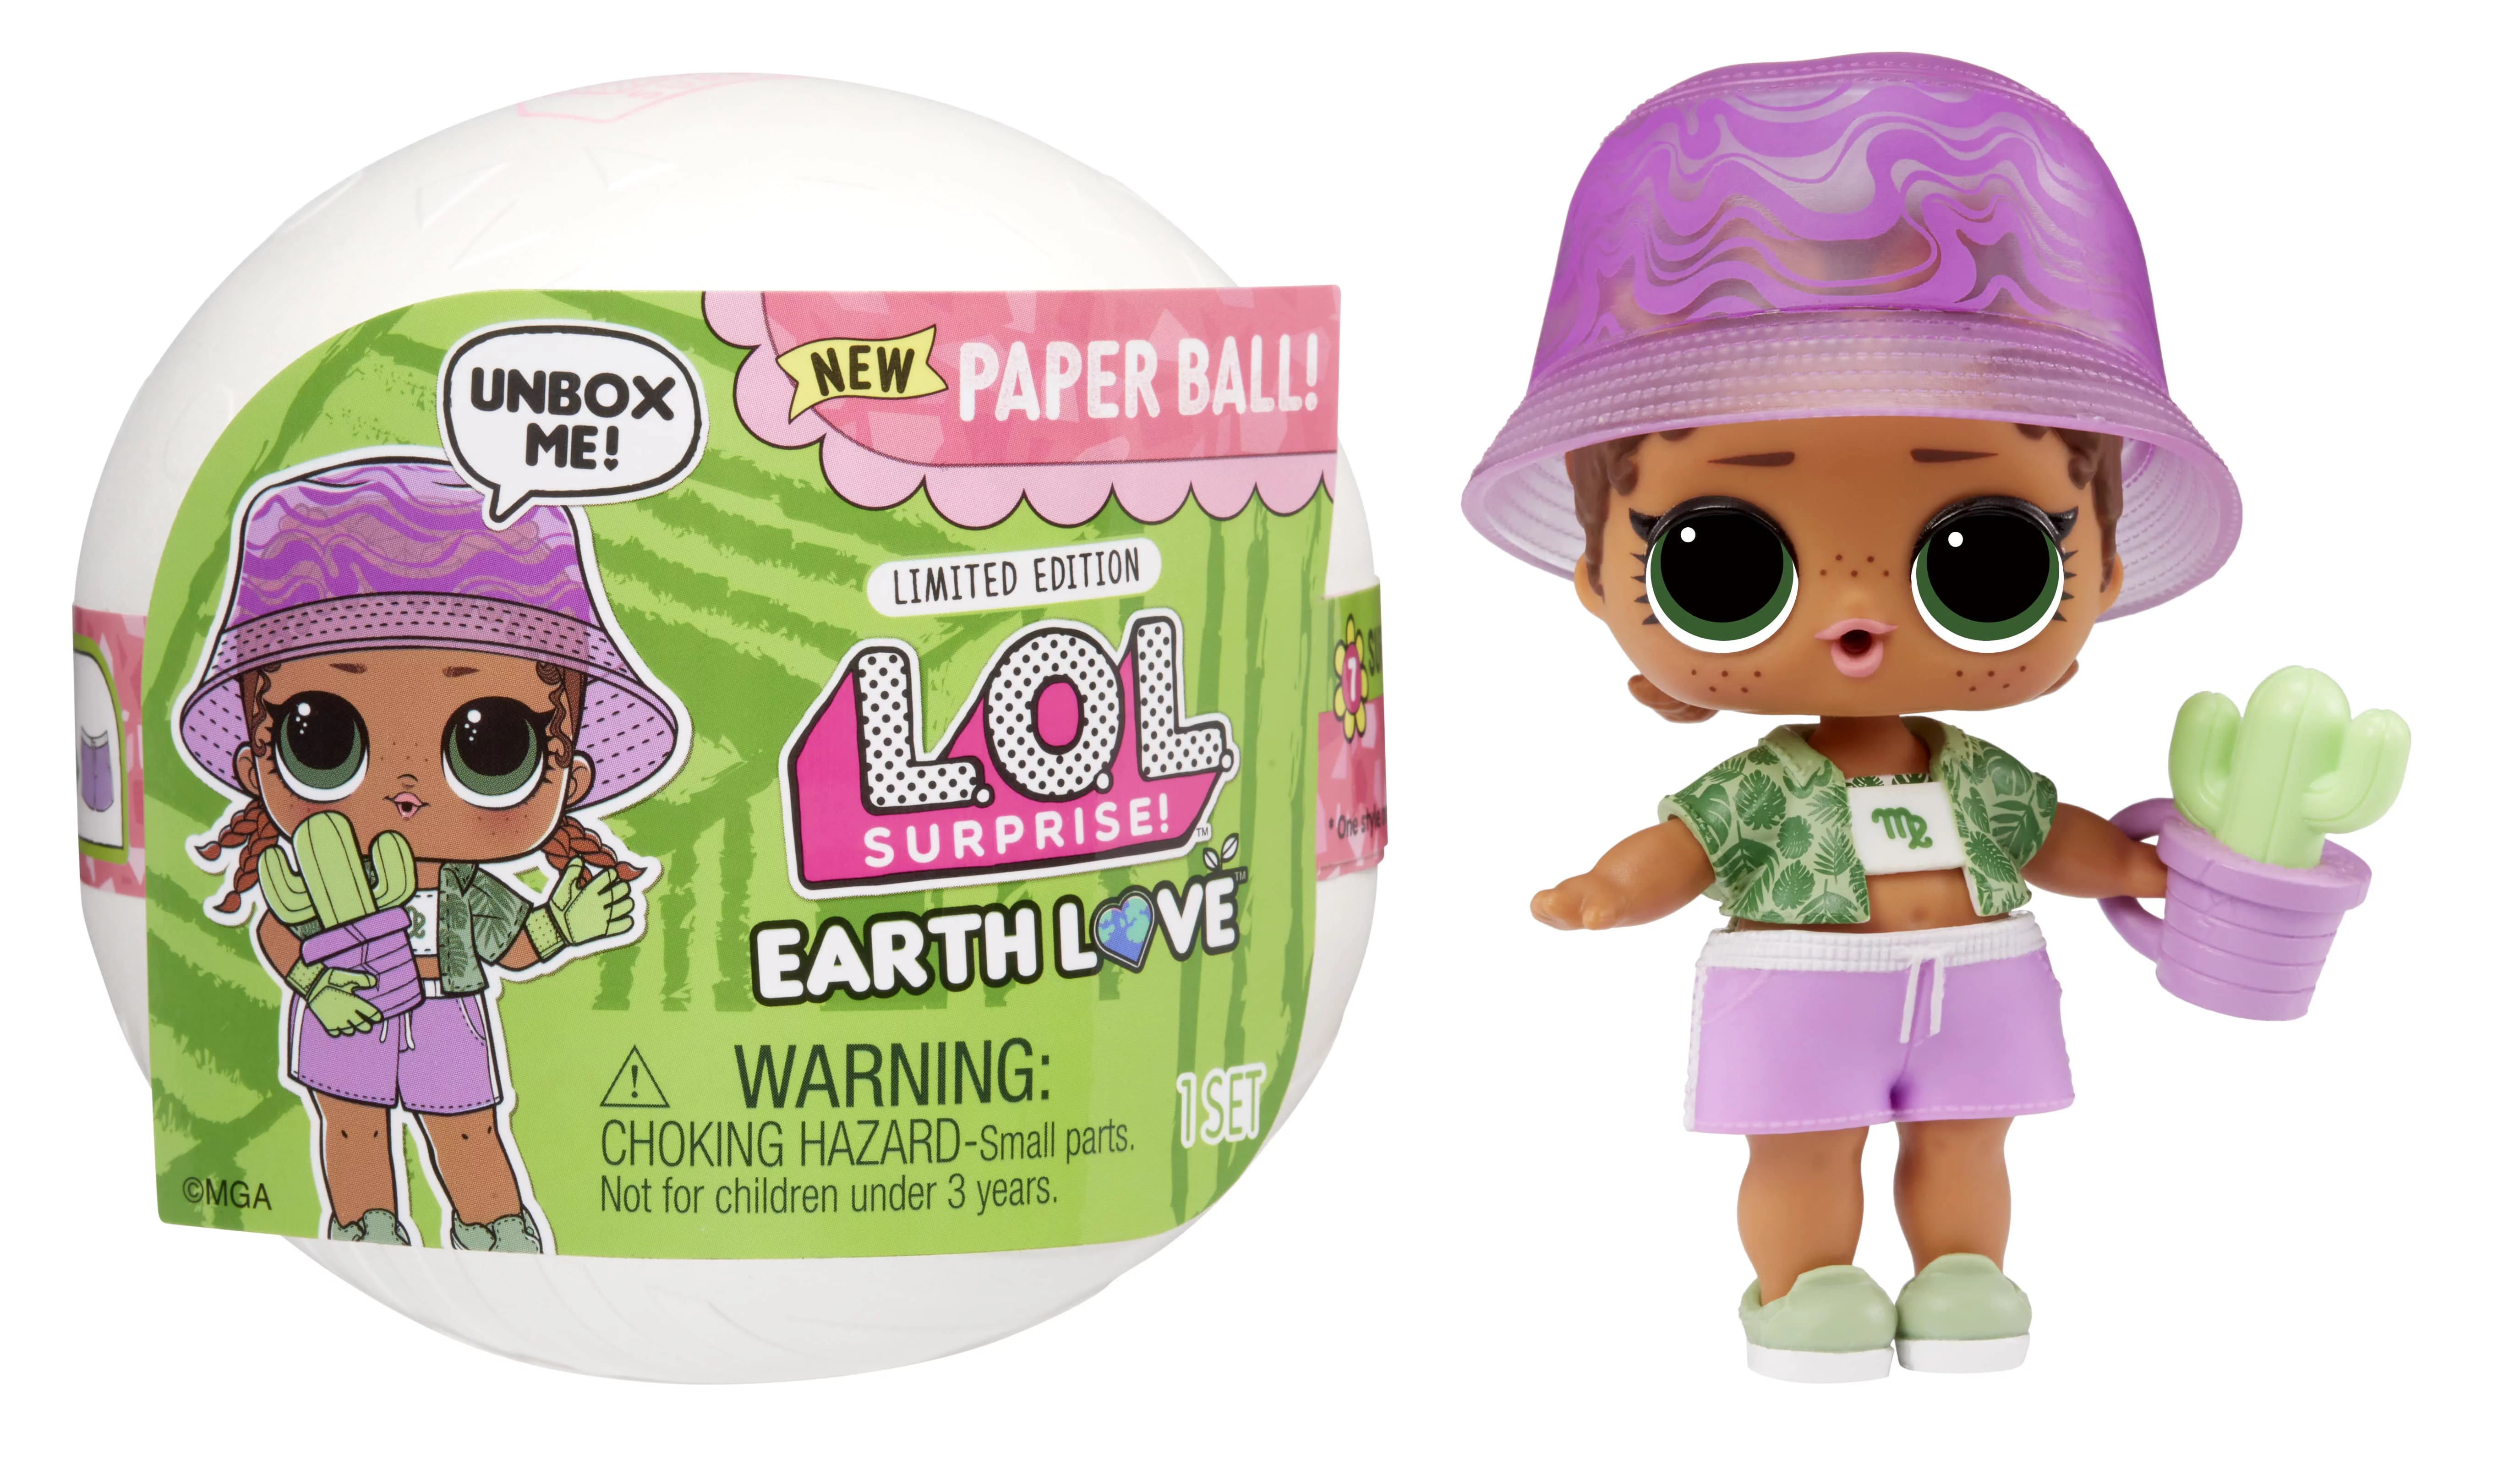 LOL Surprise Earth Love Earthy BB Doll with 7 Surprises, Earth Day Doll, Accessories, Limited Edition Doll, Collectible Doll, Paper Packaging